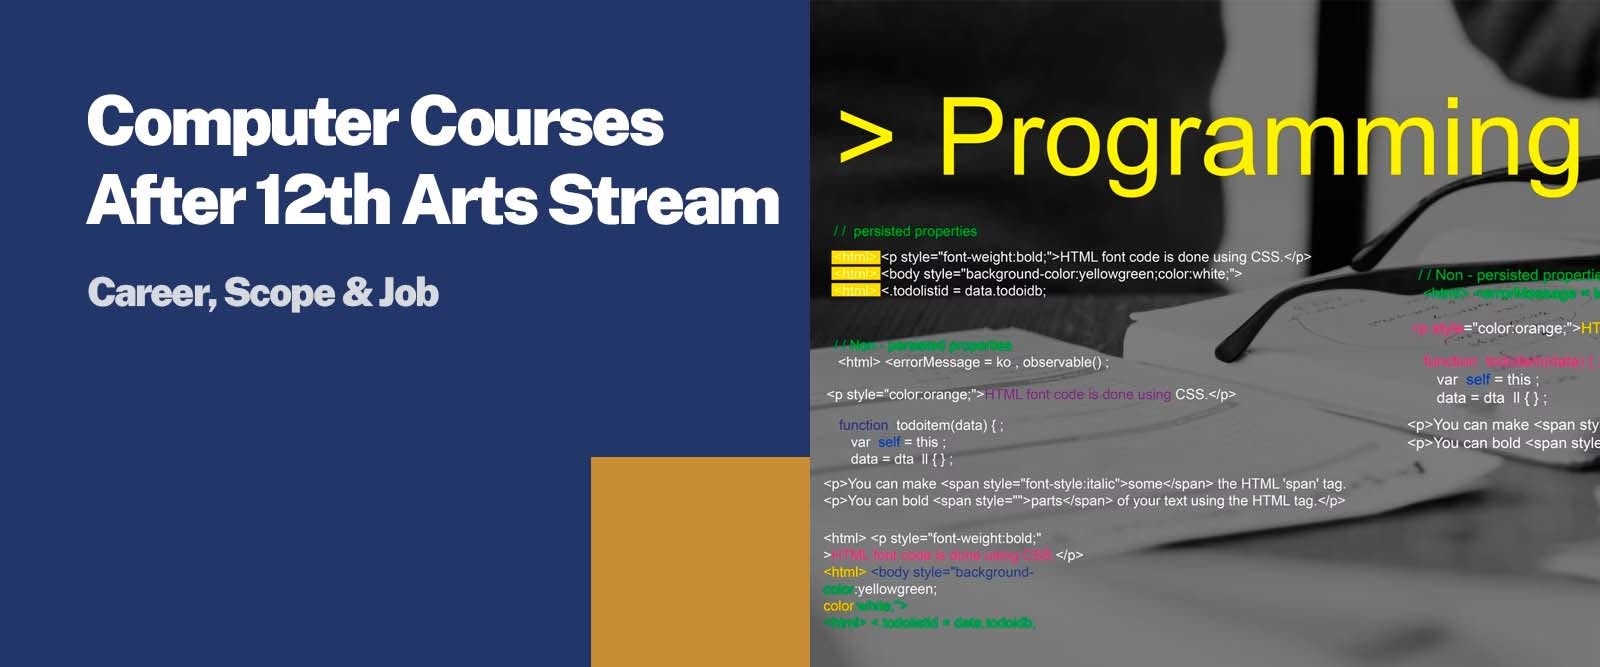 Computer Courses After 12th Arts Stream: Career, Scope & Job